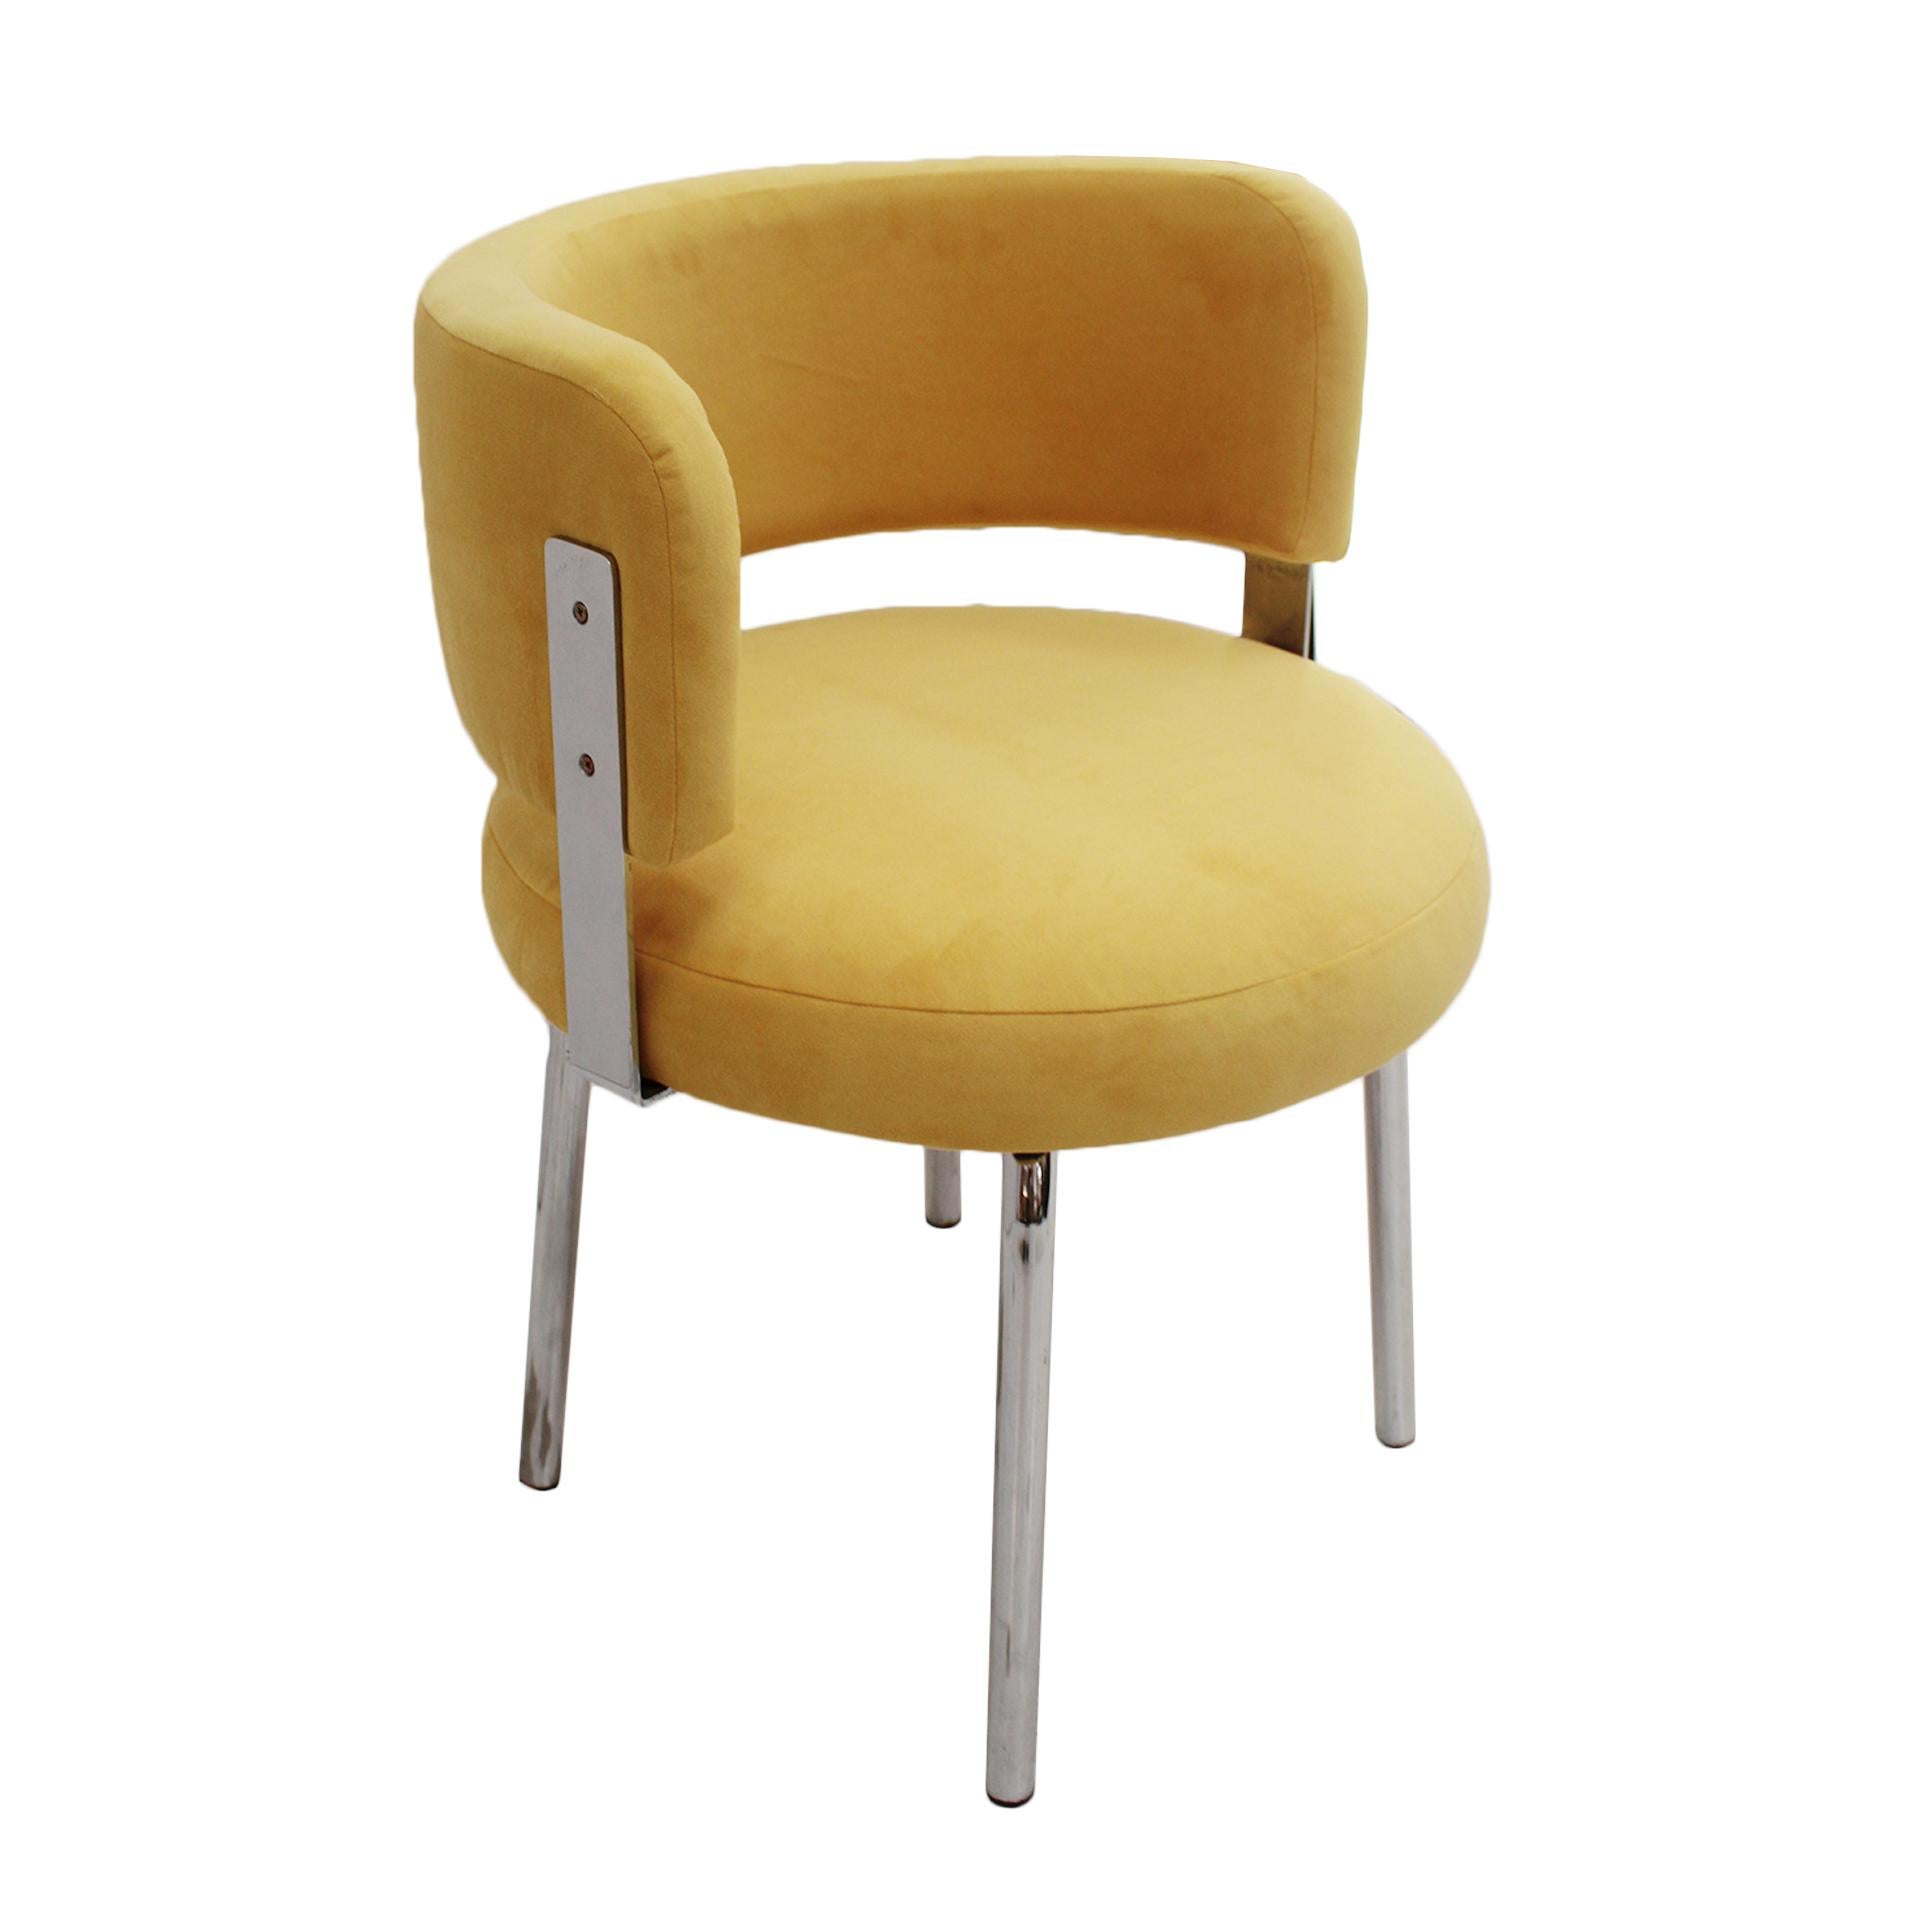 Italian Pair of Bauhaus Style Chairs for Pizzi Arredamenti Upholstered in Yellow Cotton  For Sale